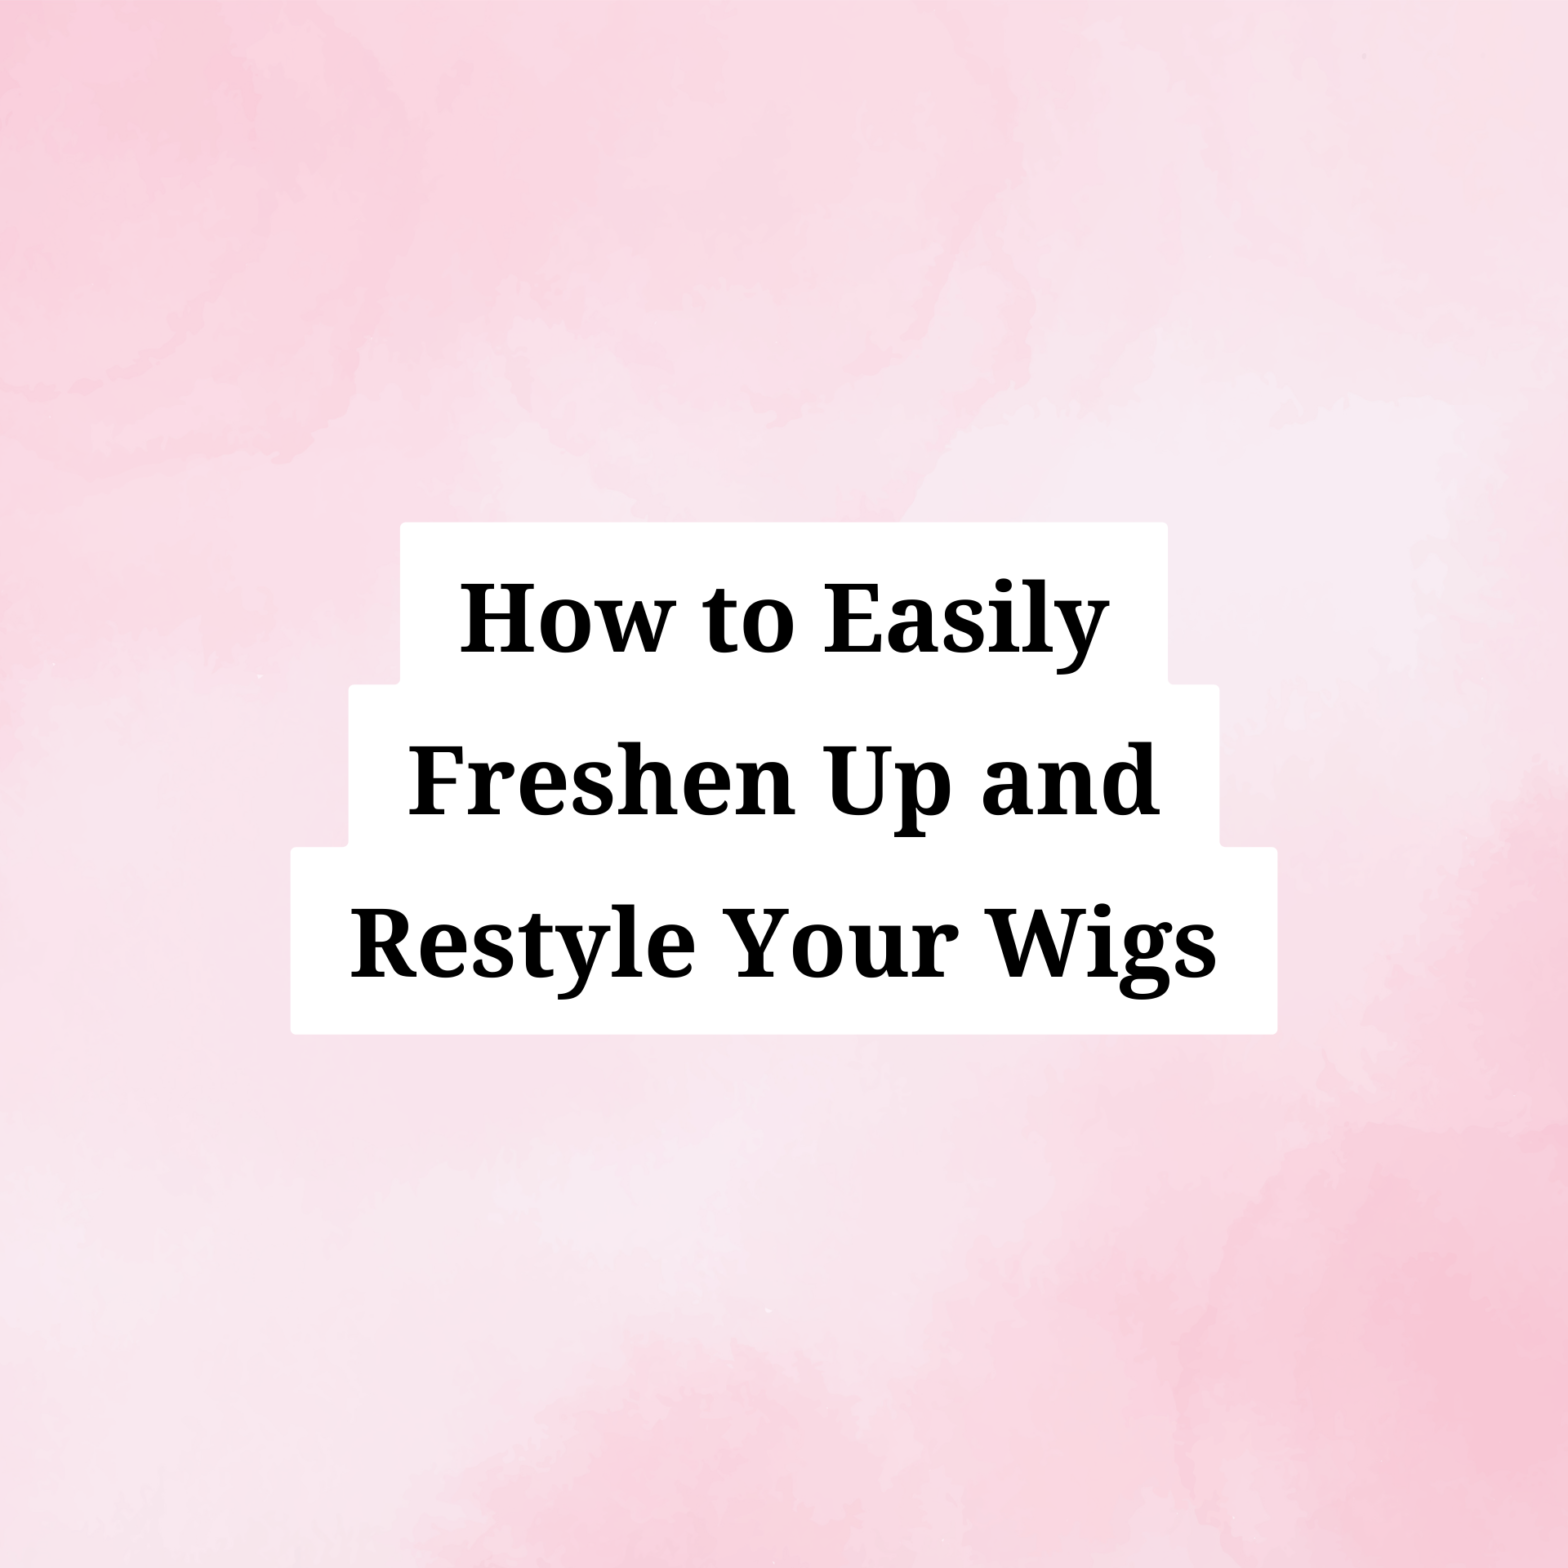 Wig Refresh with Caitlin: How to Easily Freshen Up and Restyle Your Wigs